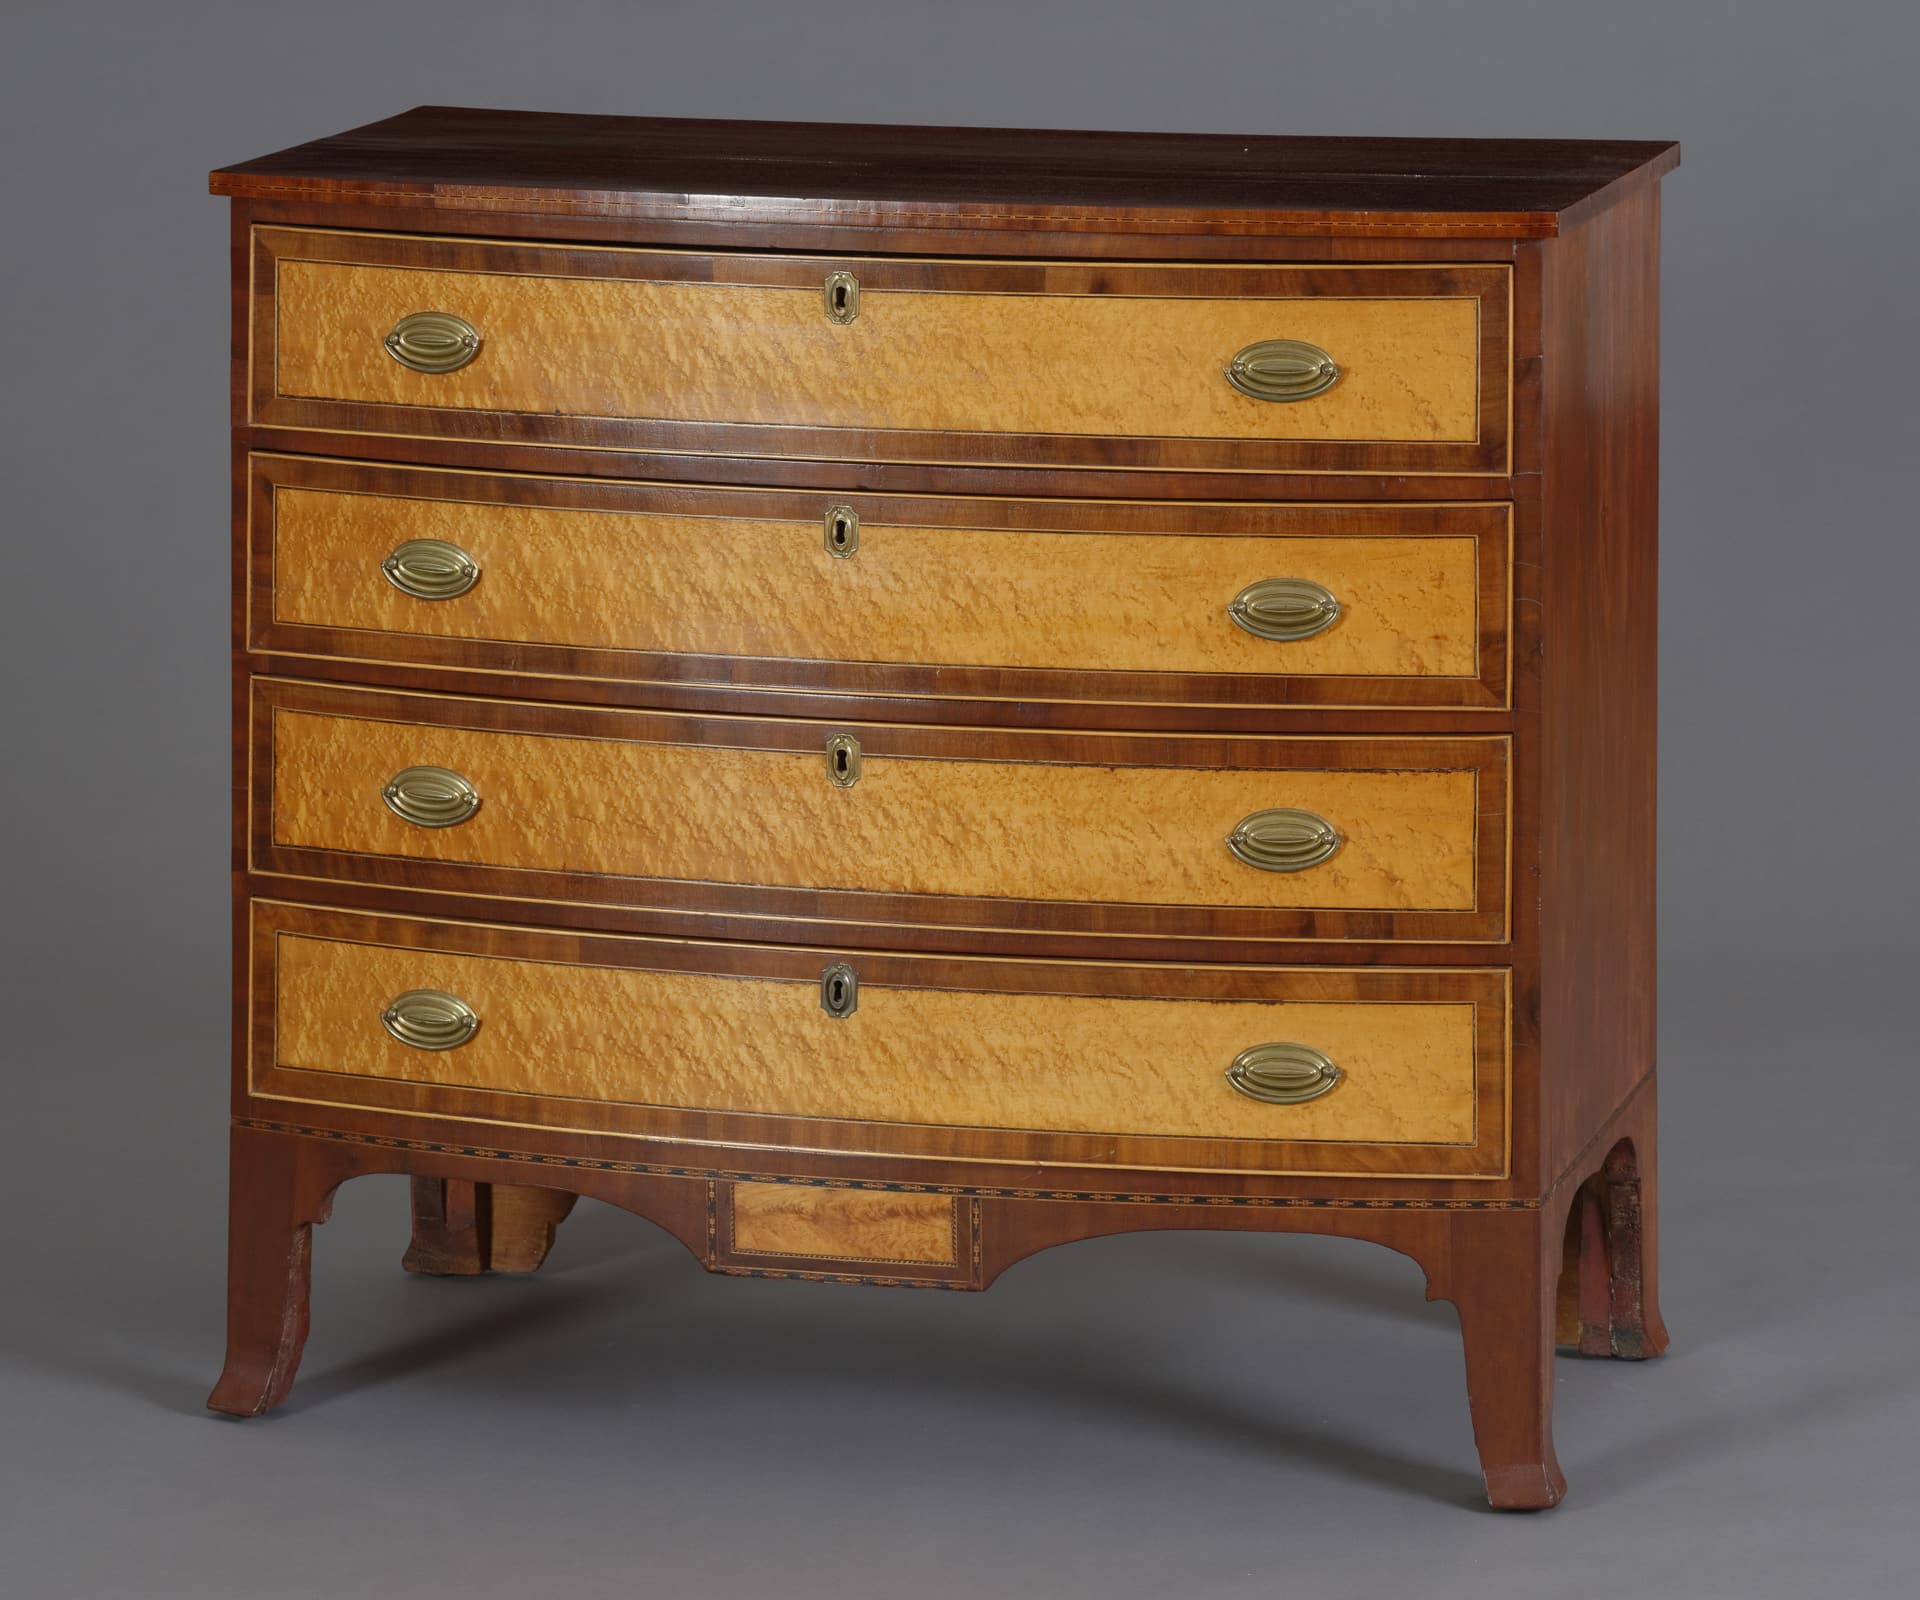 a chest of 4 drawers with lighter wood on the face of the drawers and darker wood for the case